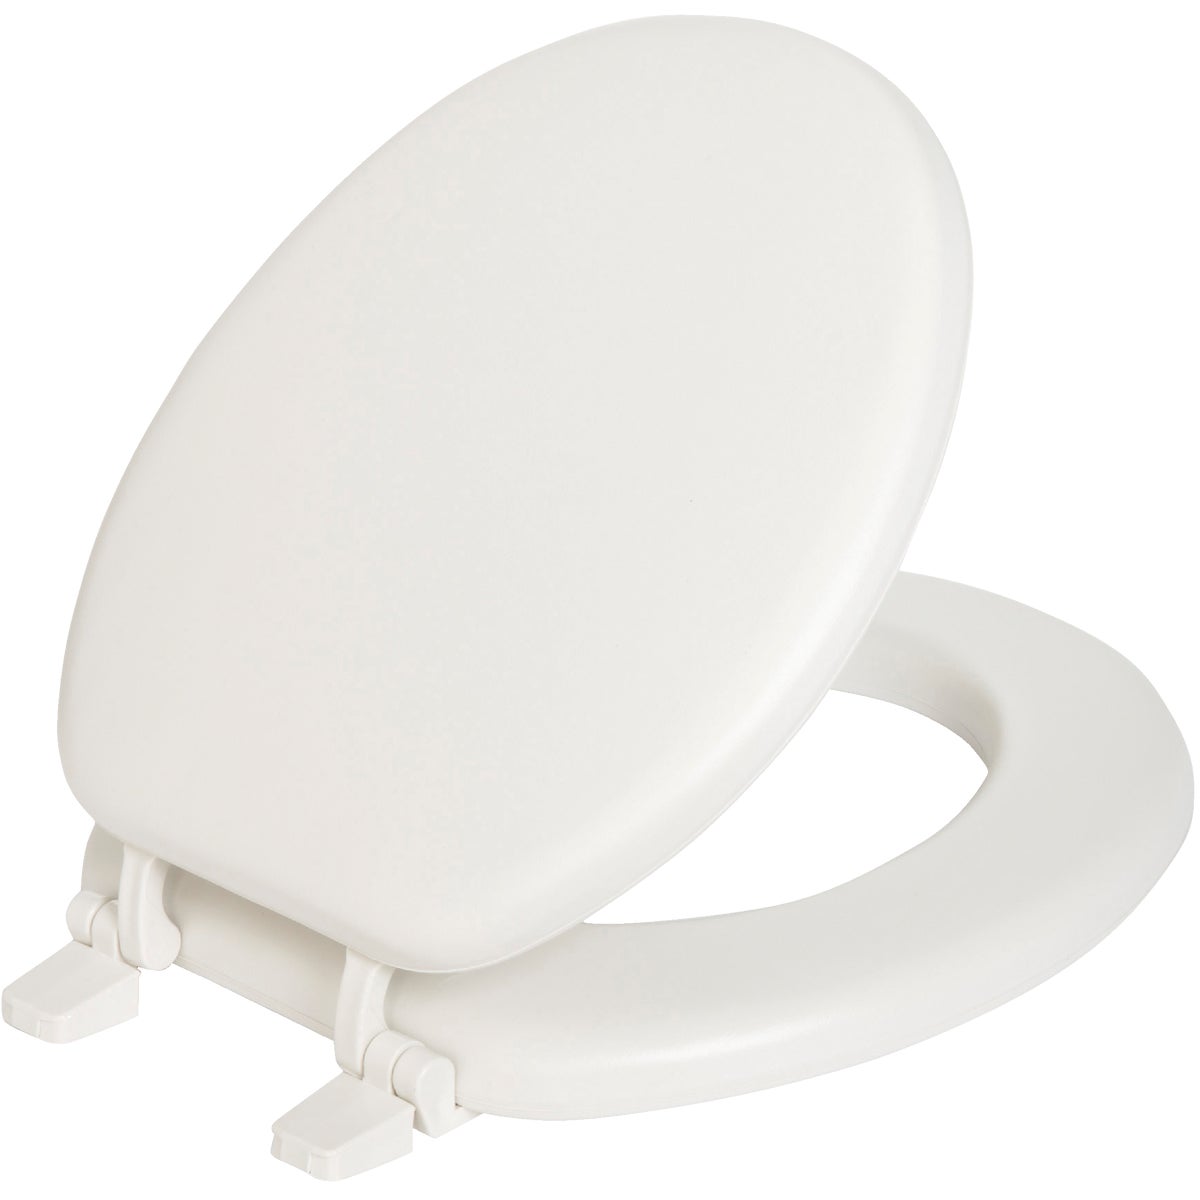 Item 446084, This round toilet seat is made from cushioned vinyl with a plastic core.